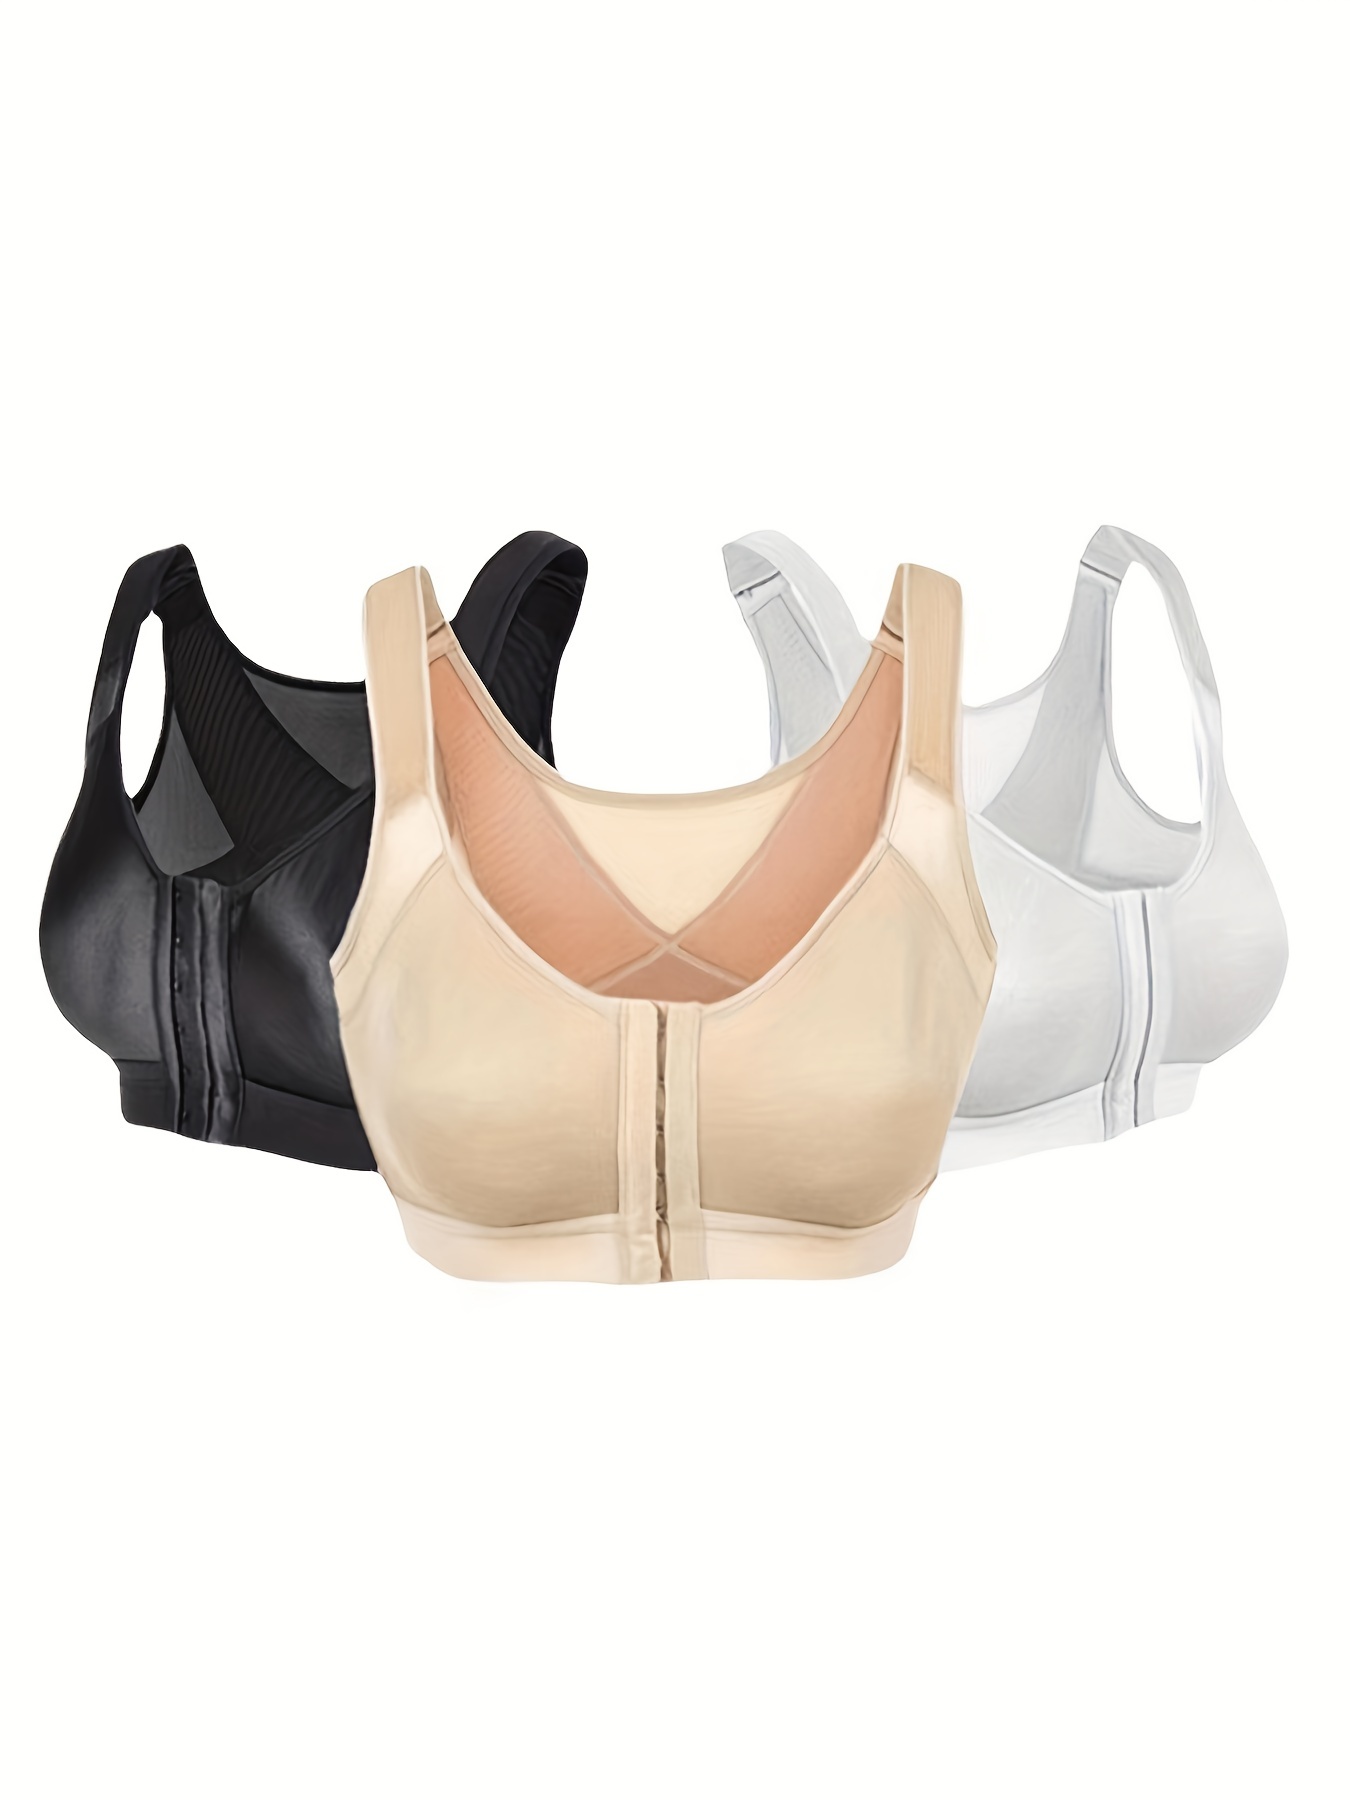 Pregnant Women's Seamless Nursing Bras, Supportive Breastfeeding Comfy Bra  For Daily Comfort, Open Front Button Maternity Nursing Bra